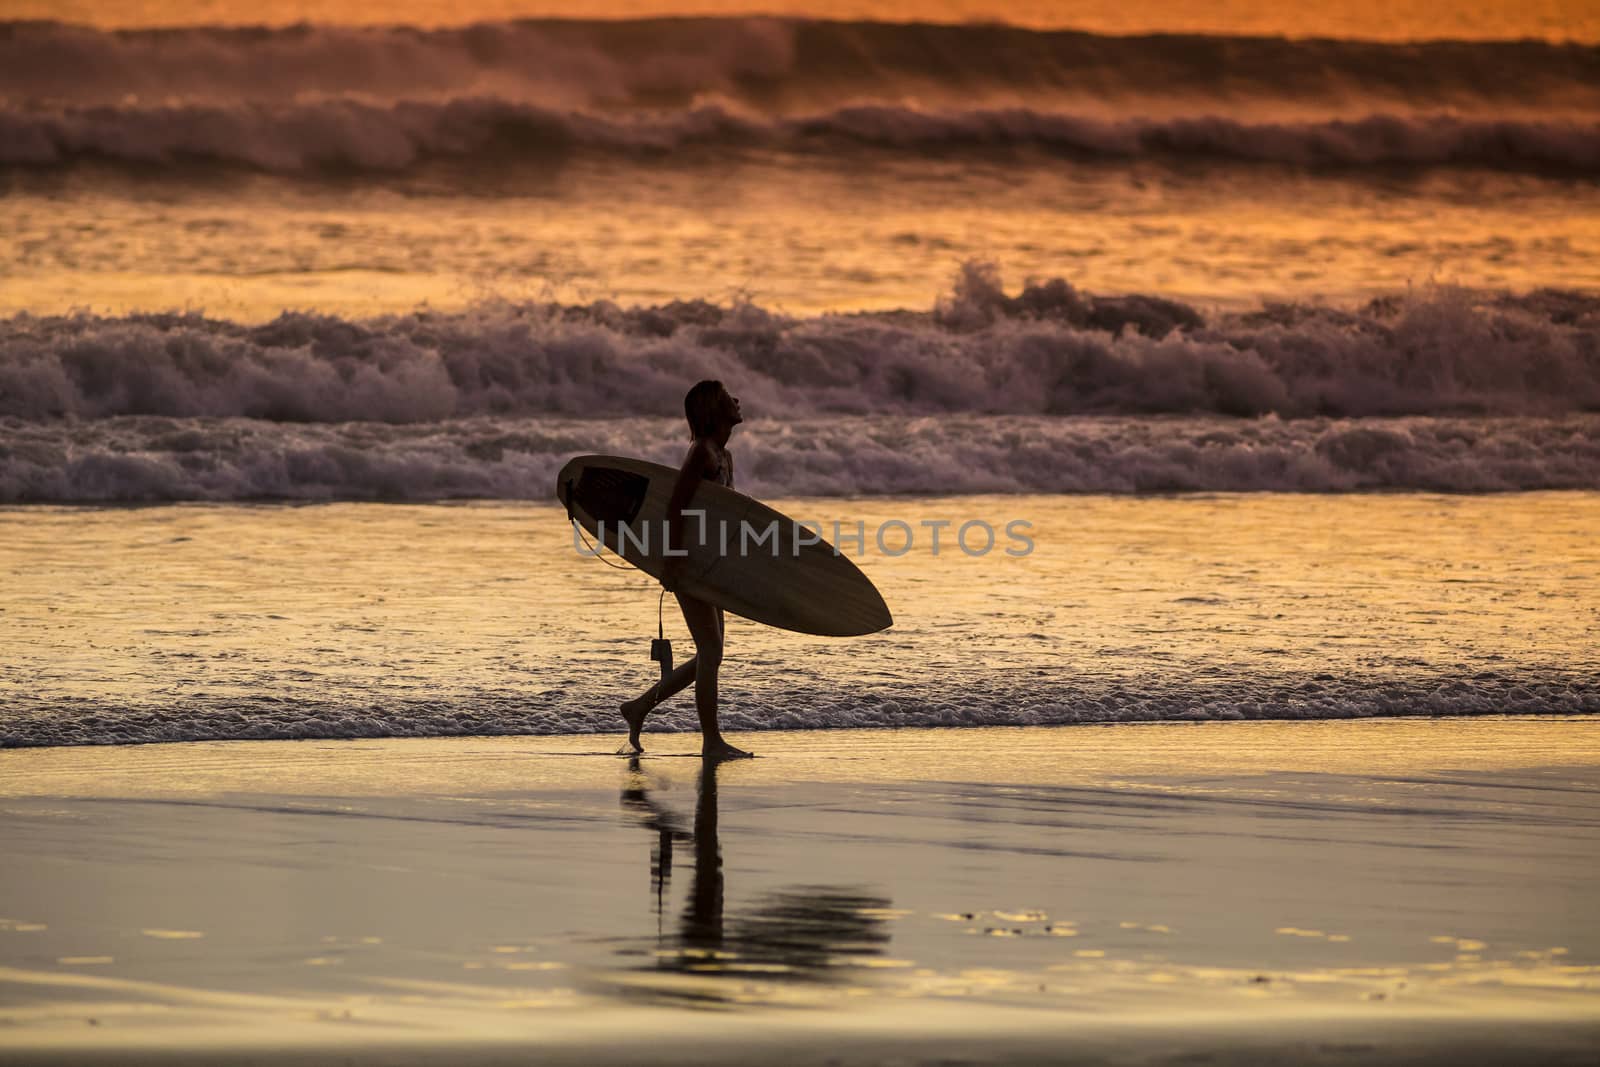 Surfer on the Beach at Sunset Tme by truphoto